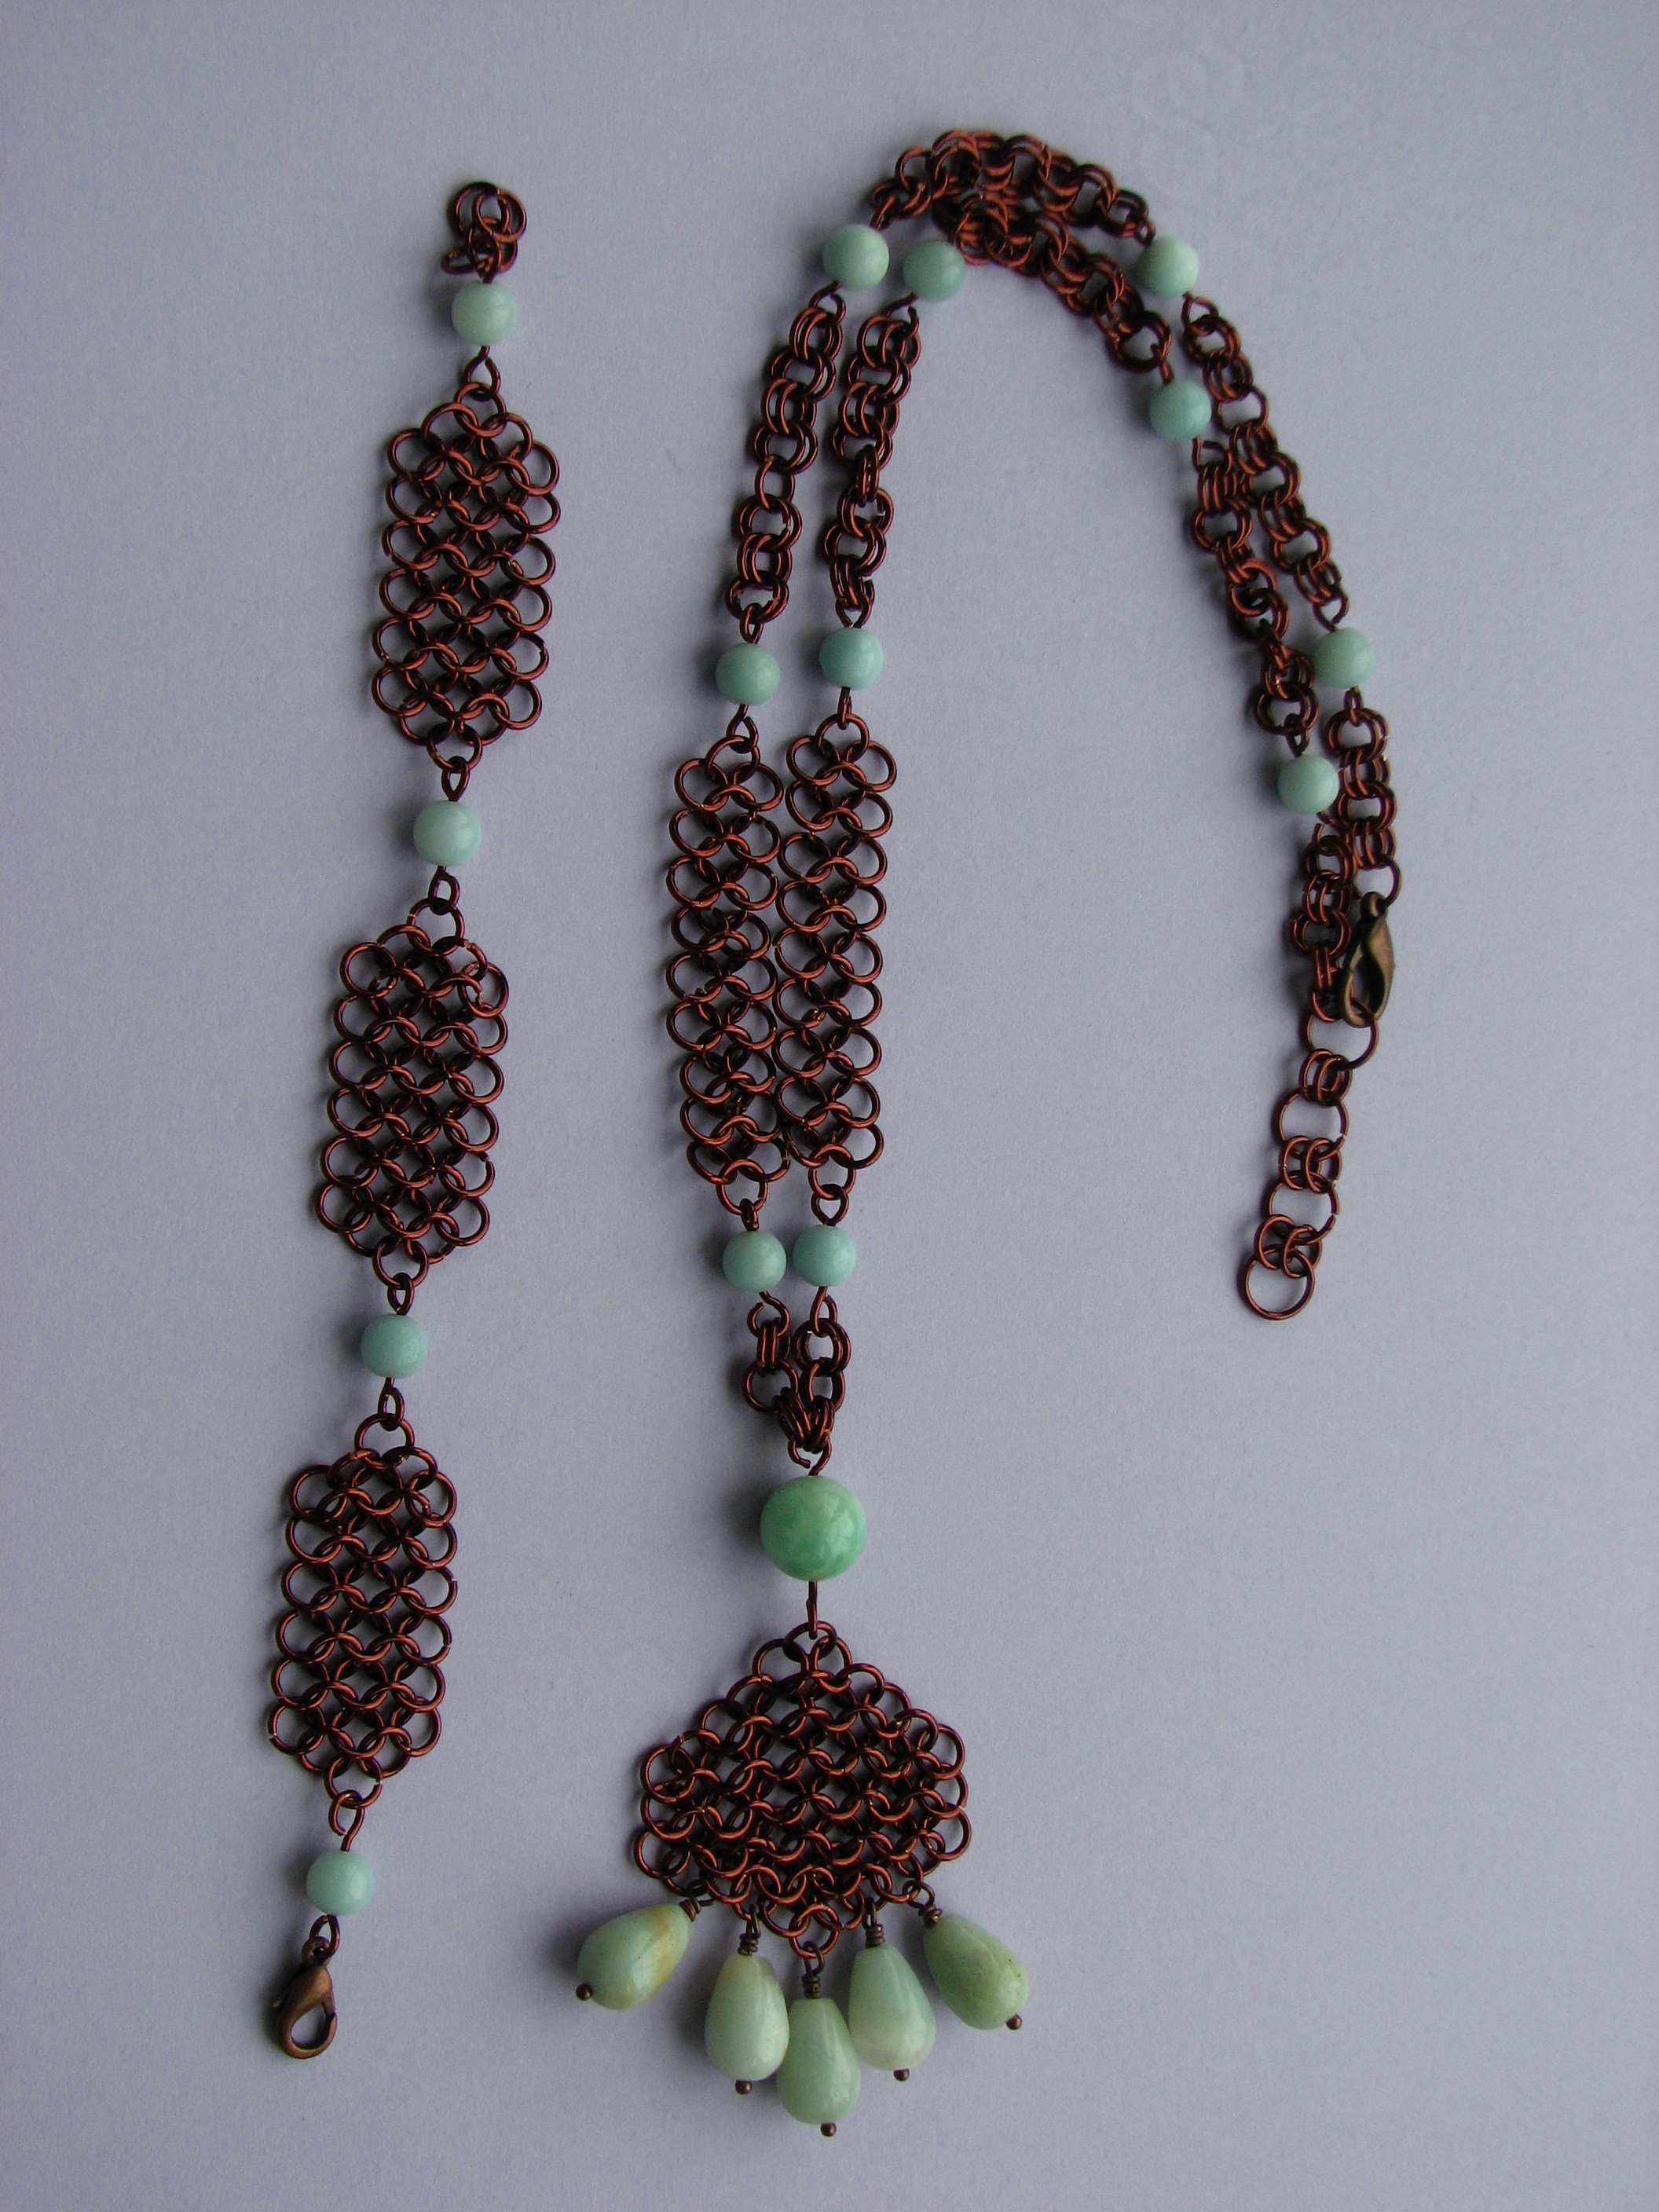 Amazonite and Chain Maille necklace and bracelet